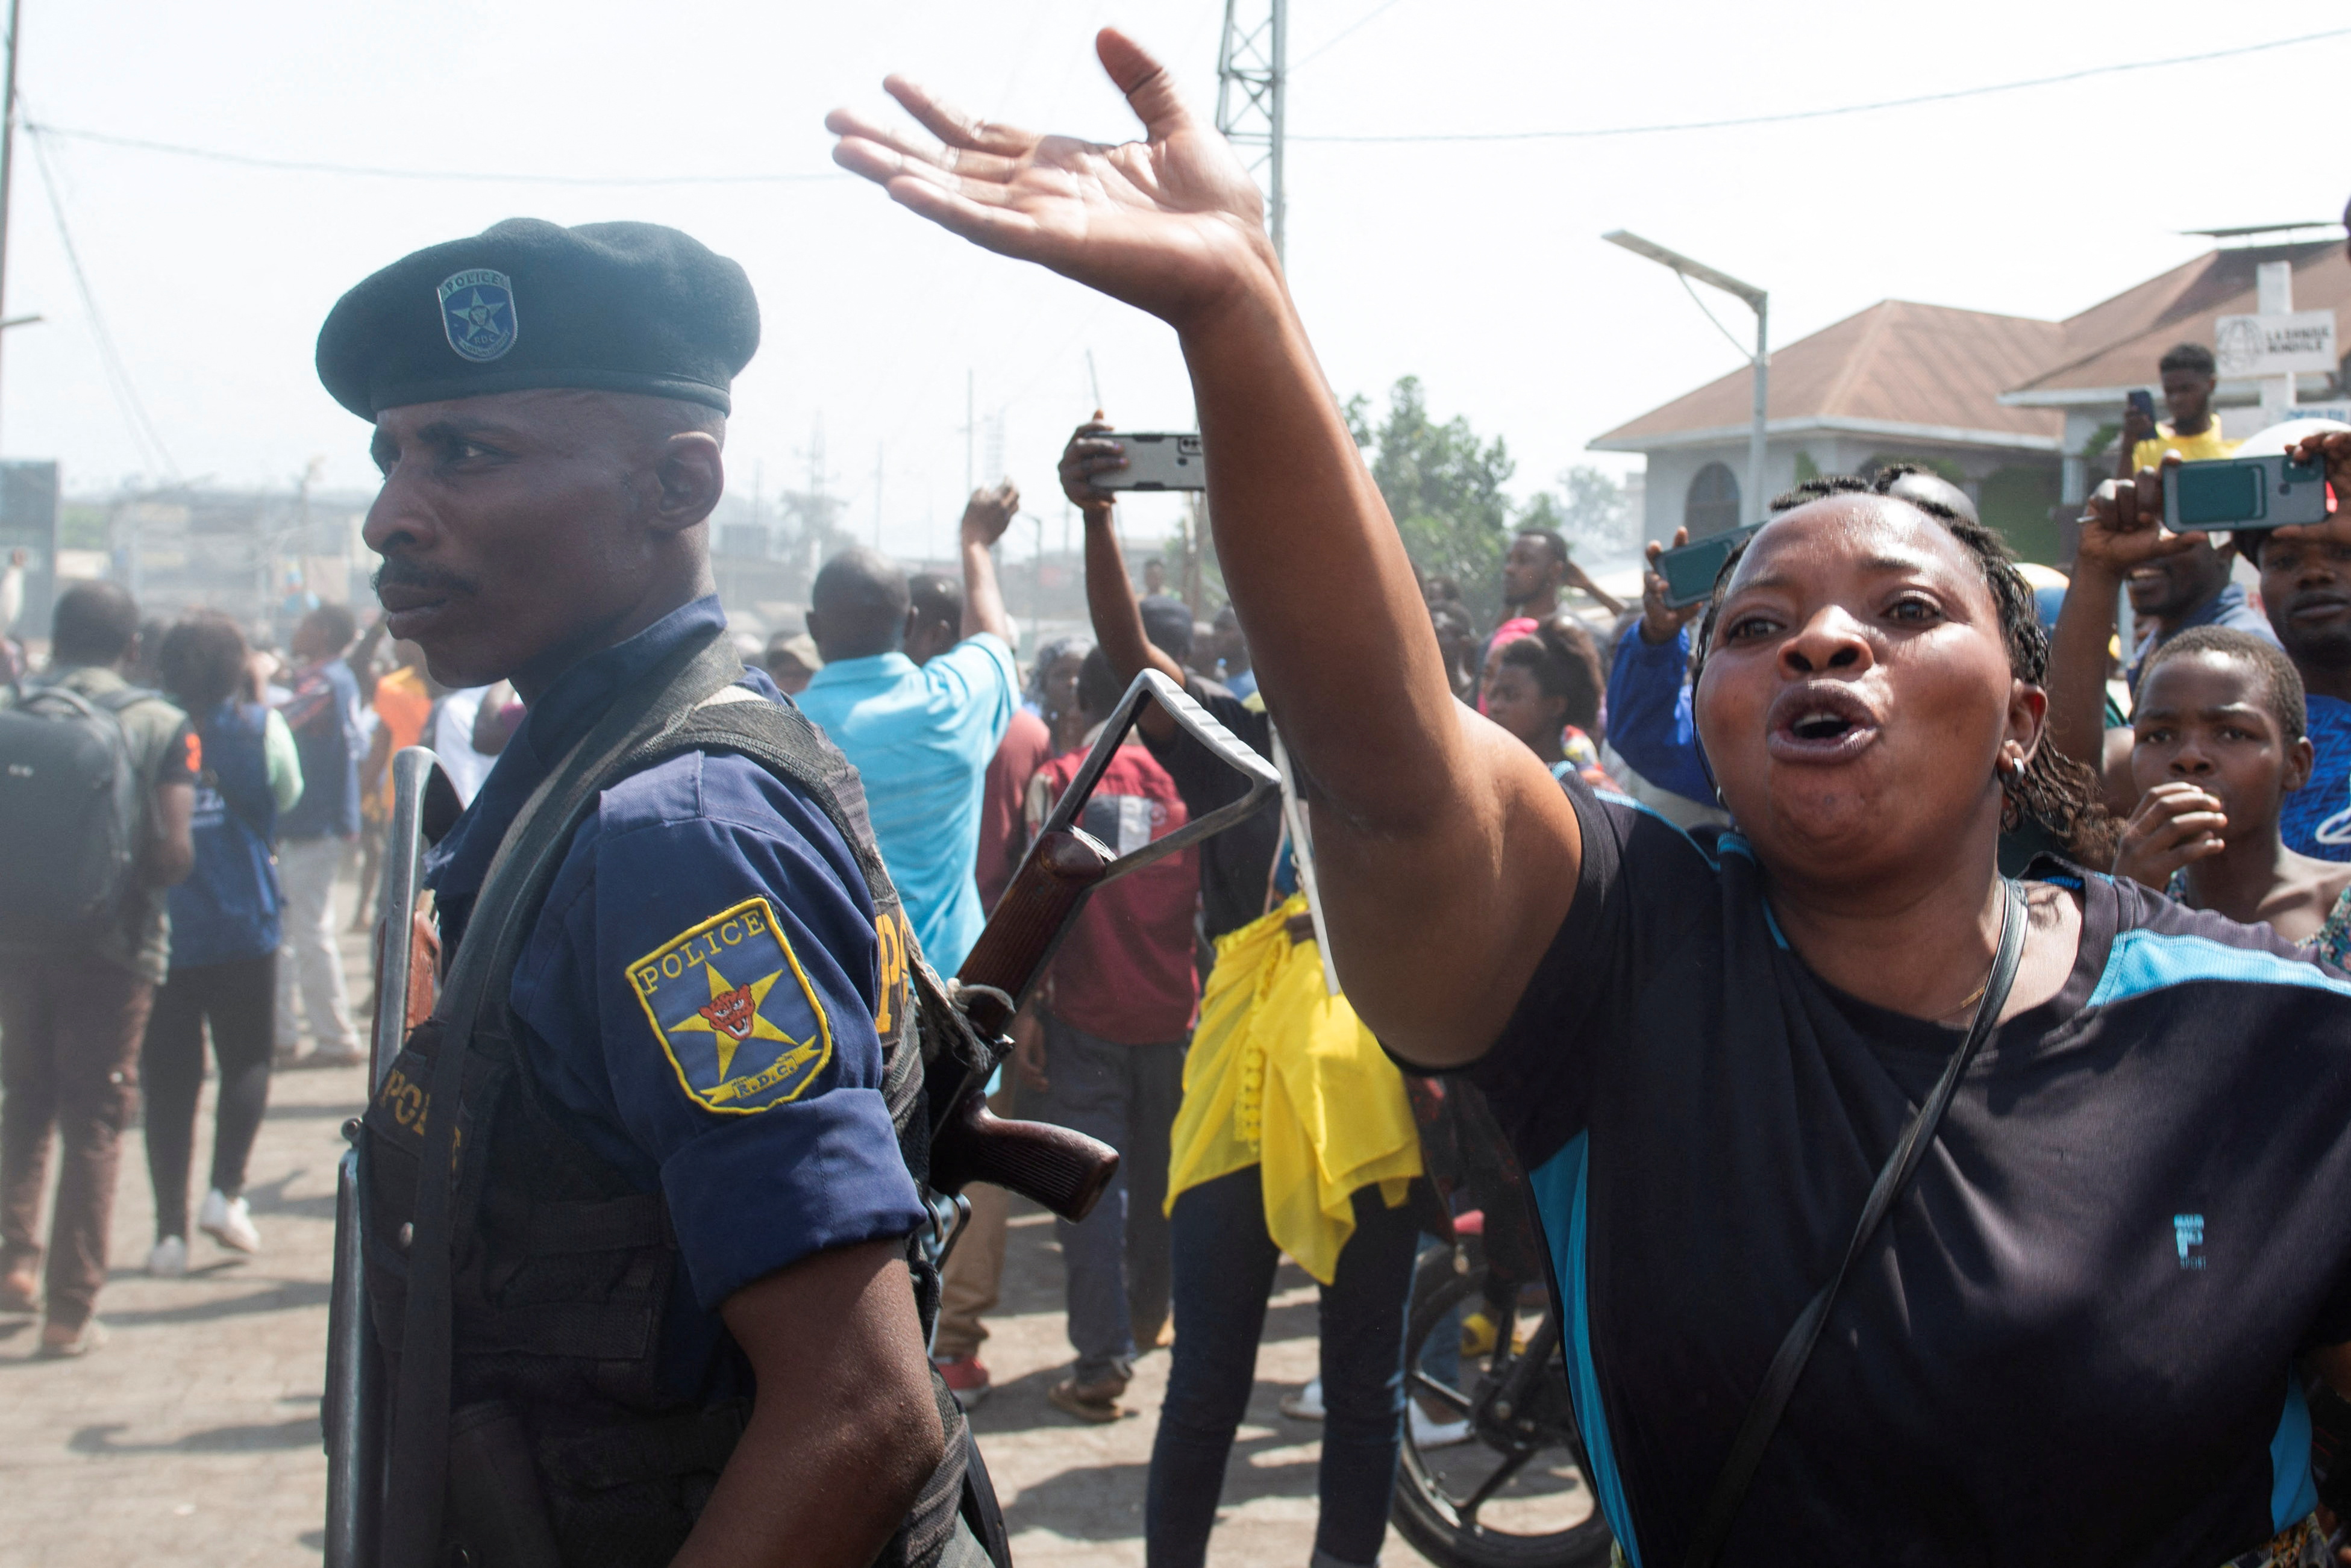 A Congolese woman reacts during a protest demanding the body of a Congolese soldier shot dead in Rwanda